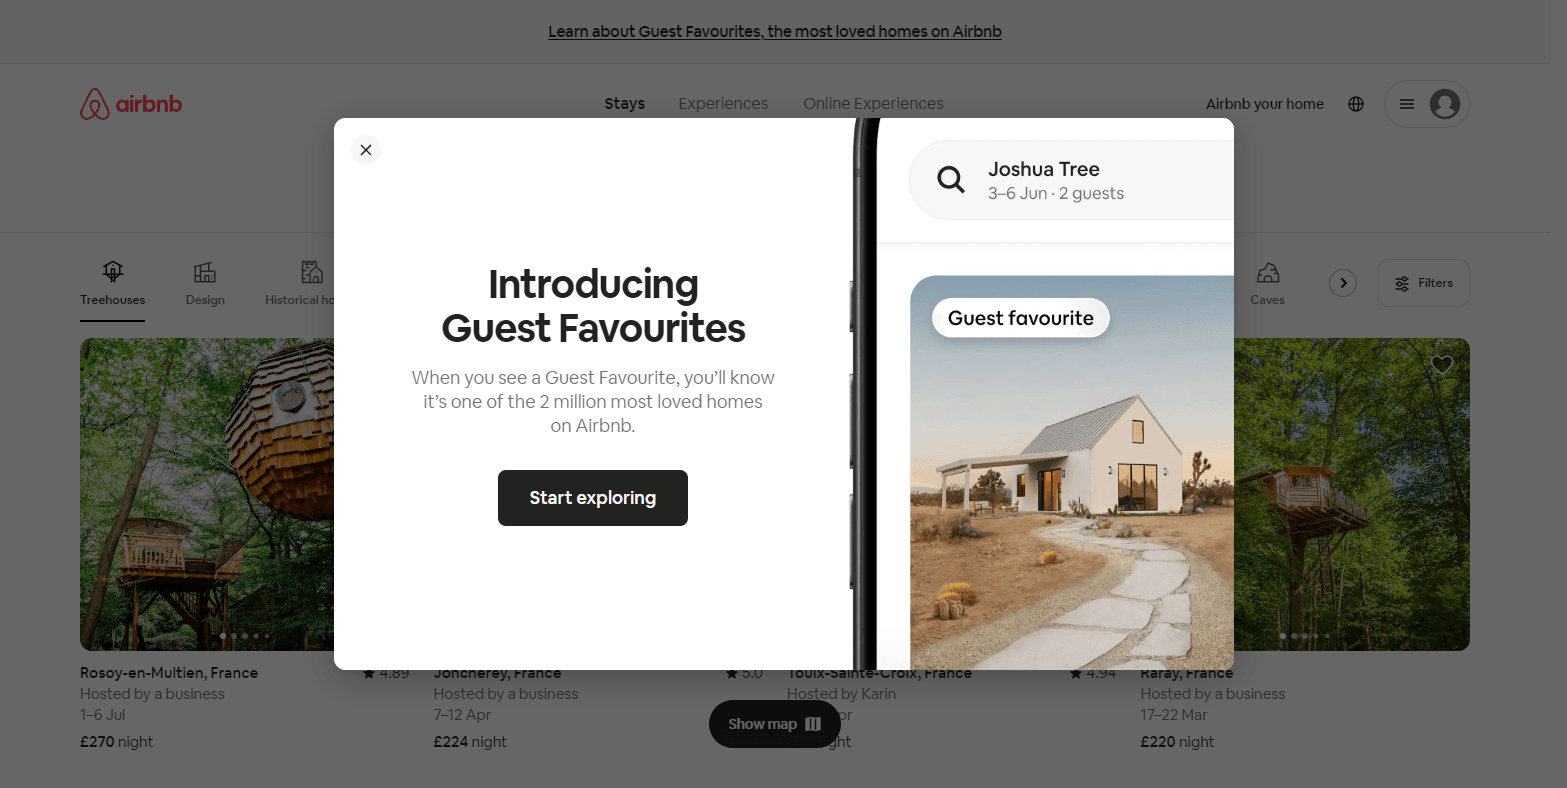 A screenshot of AirBnB's homepage showing their new 'Guest Favourites' feature